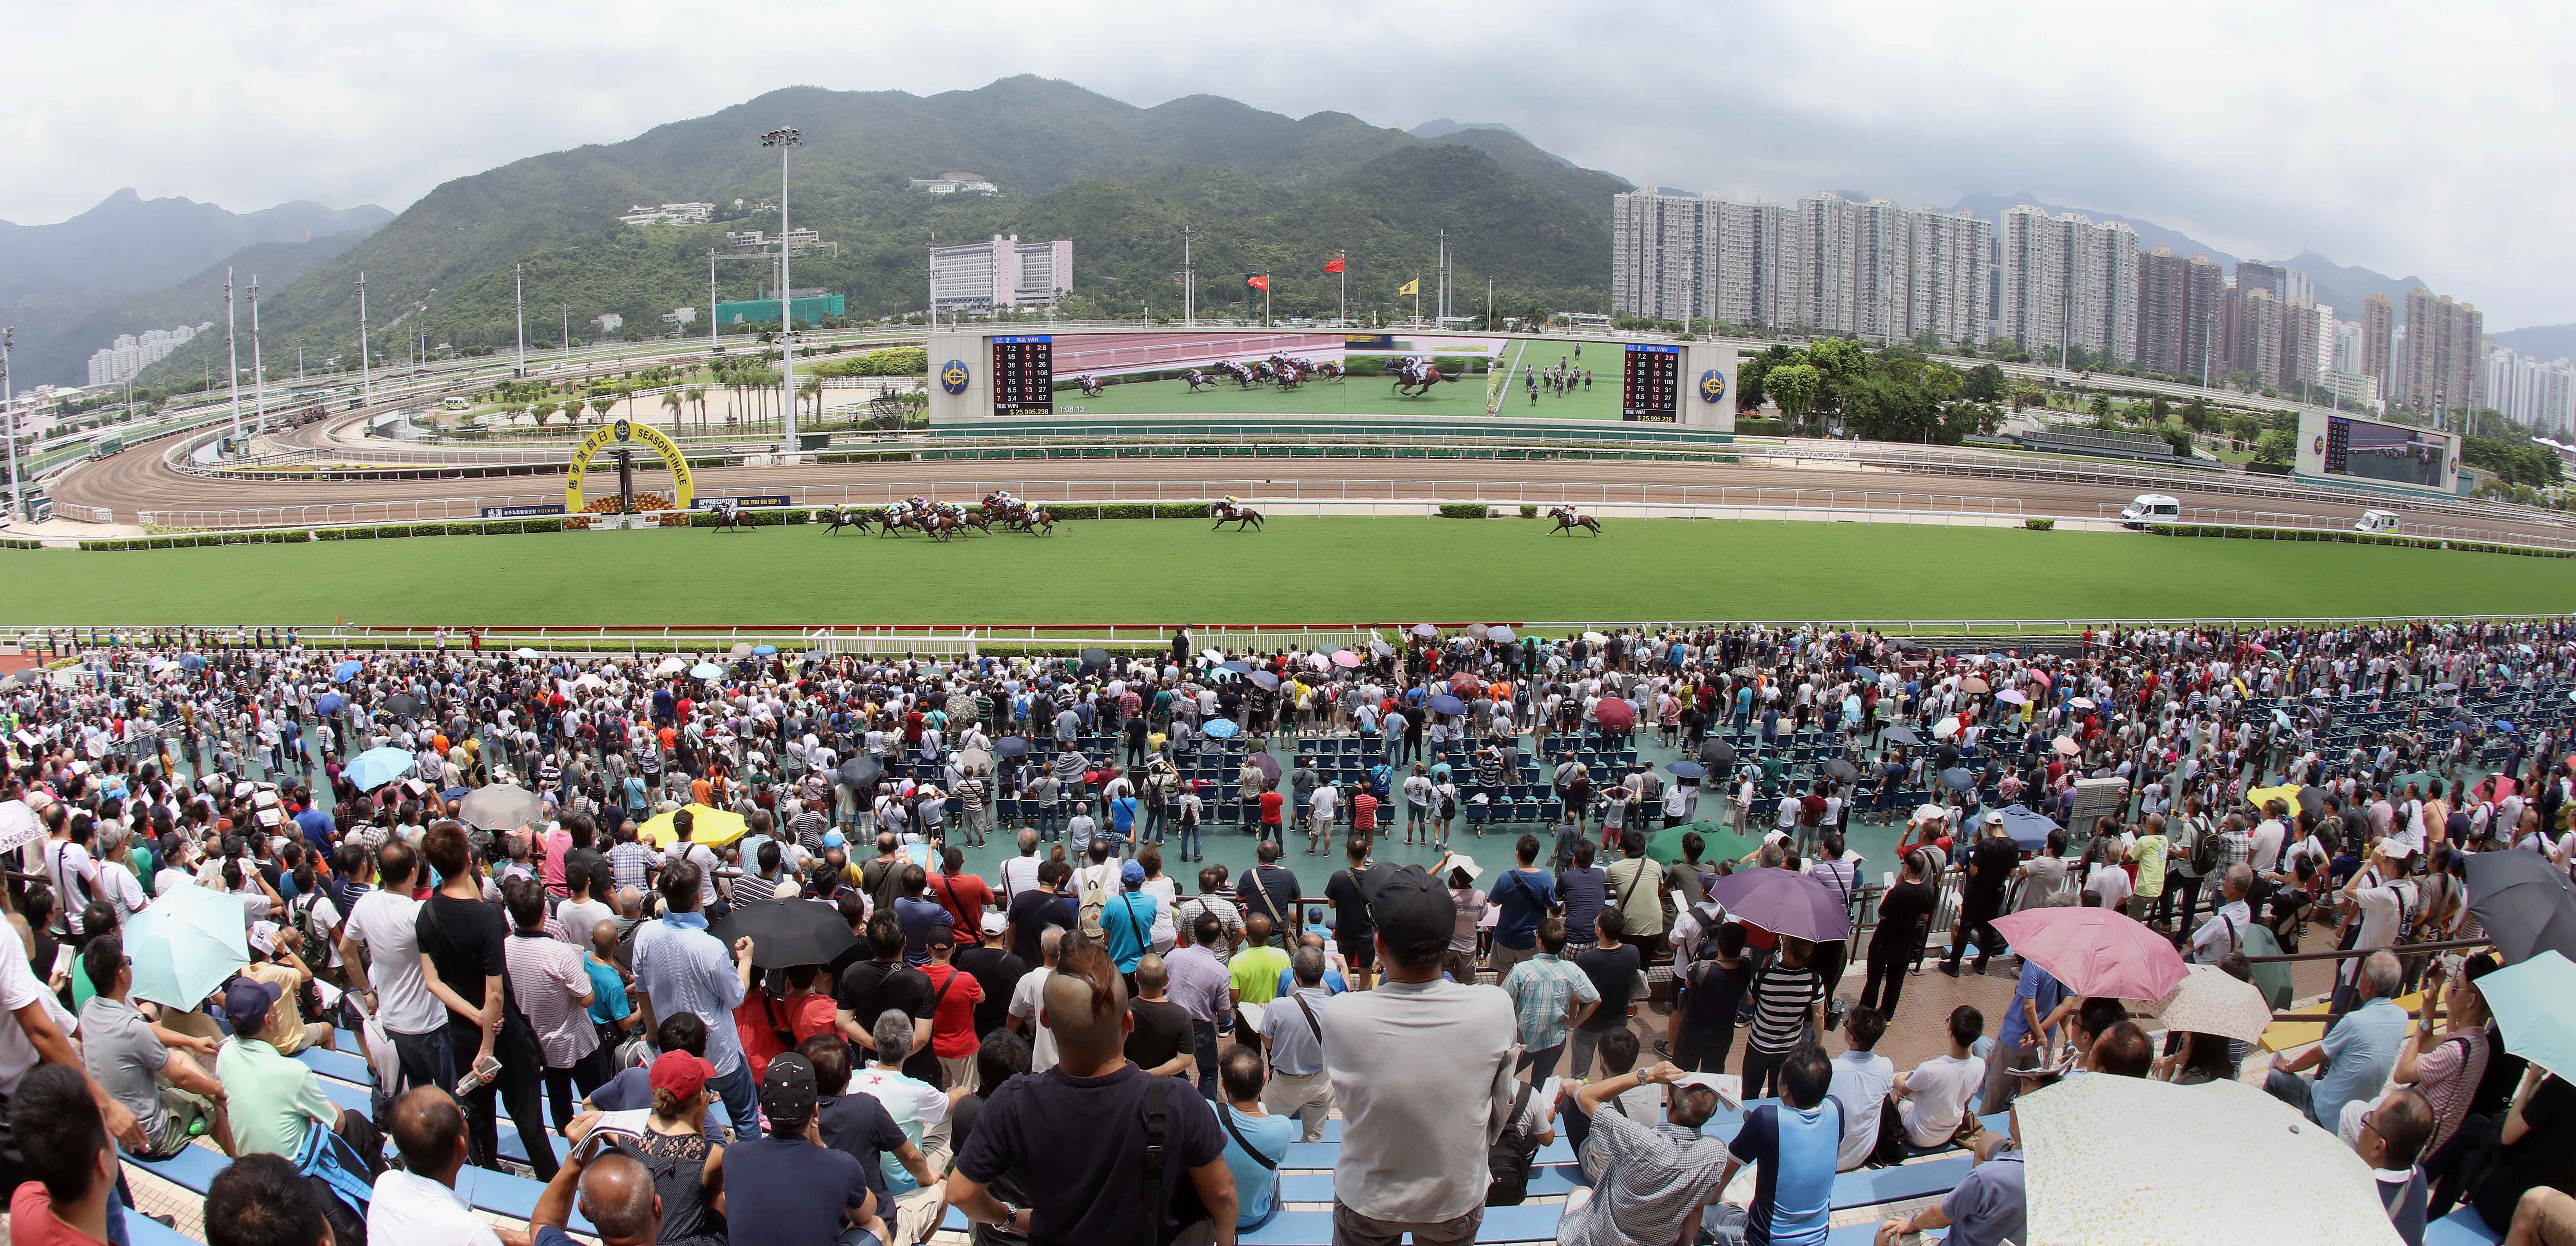 Racing fans enjoy a day of exciting races and activities at the Season Finale meeting at Sha Tin Racecourse today.